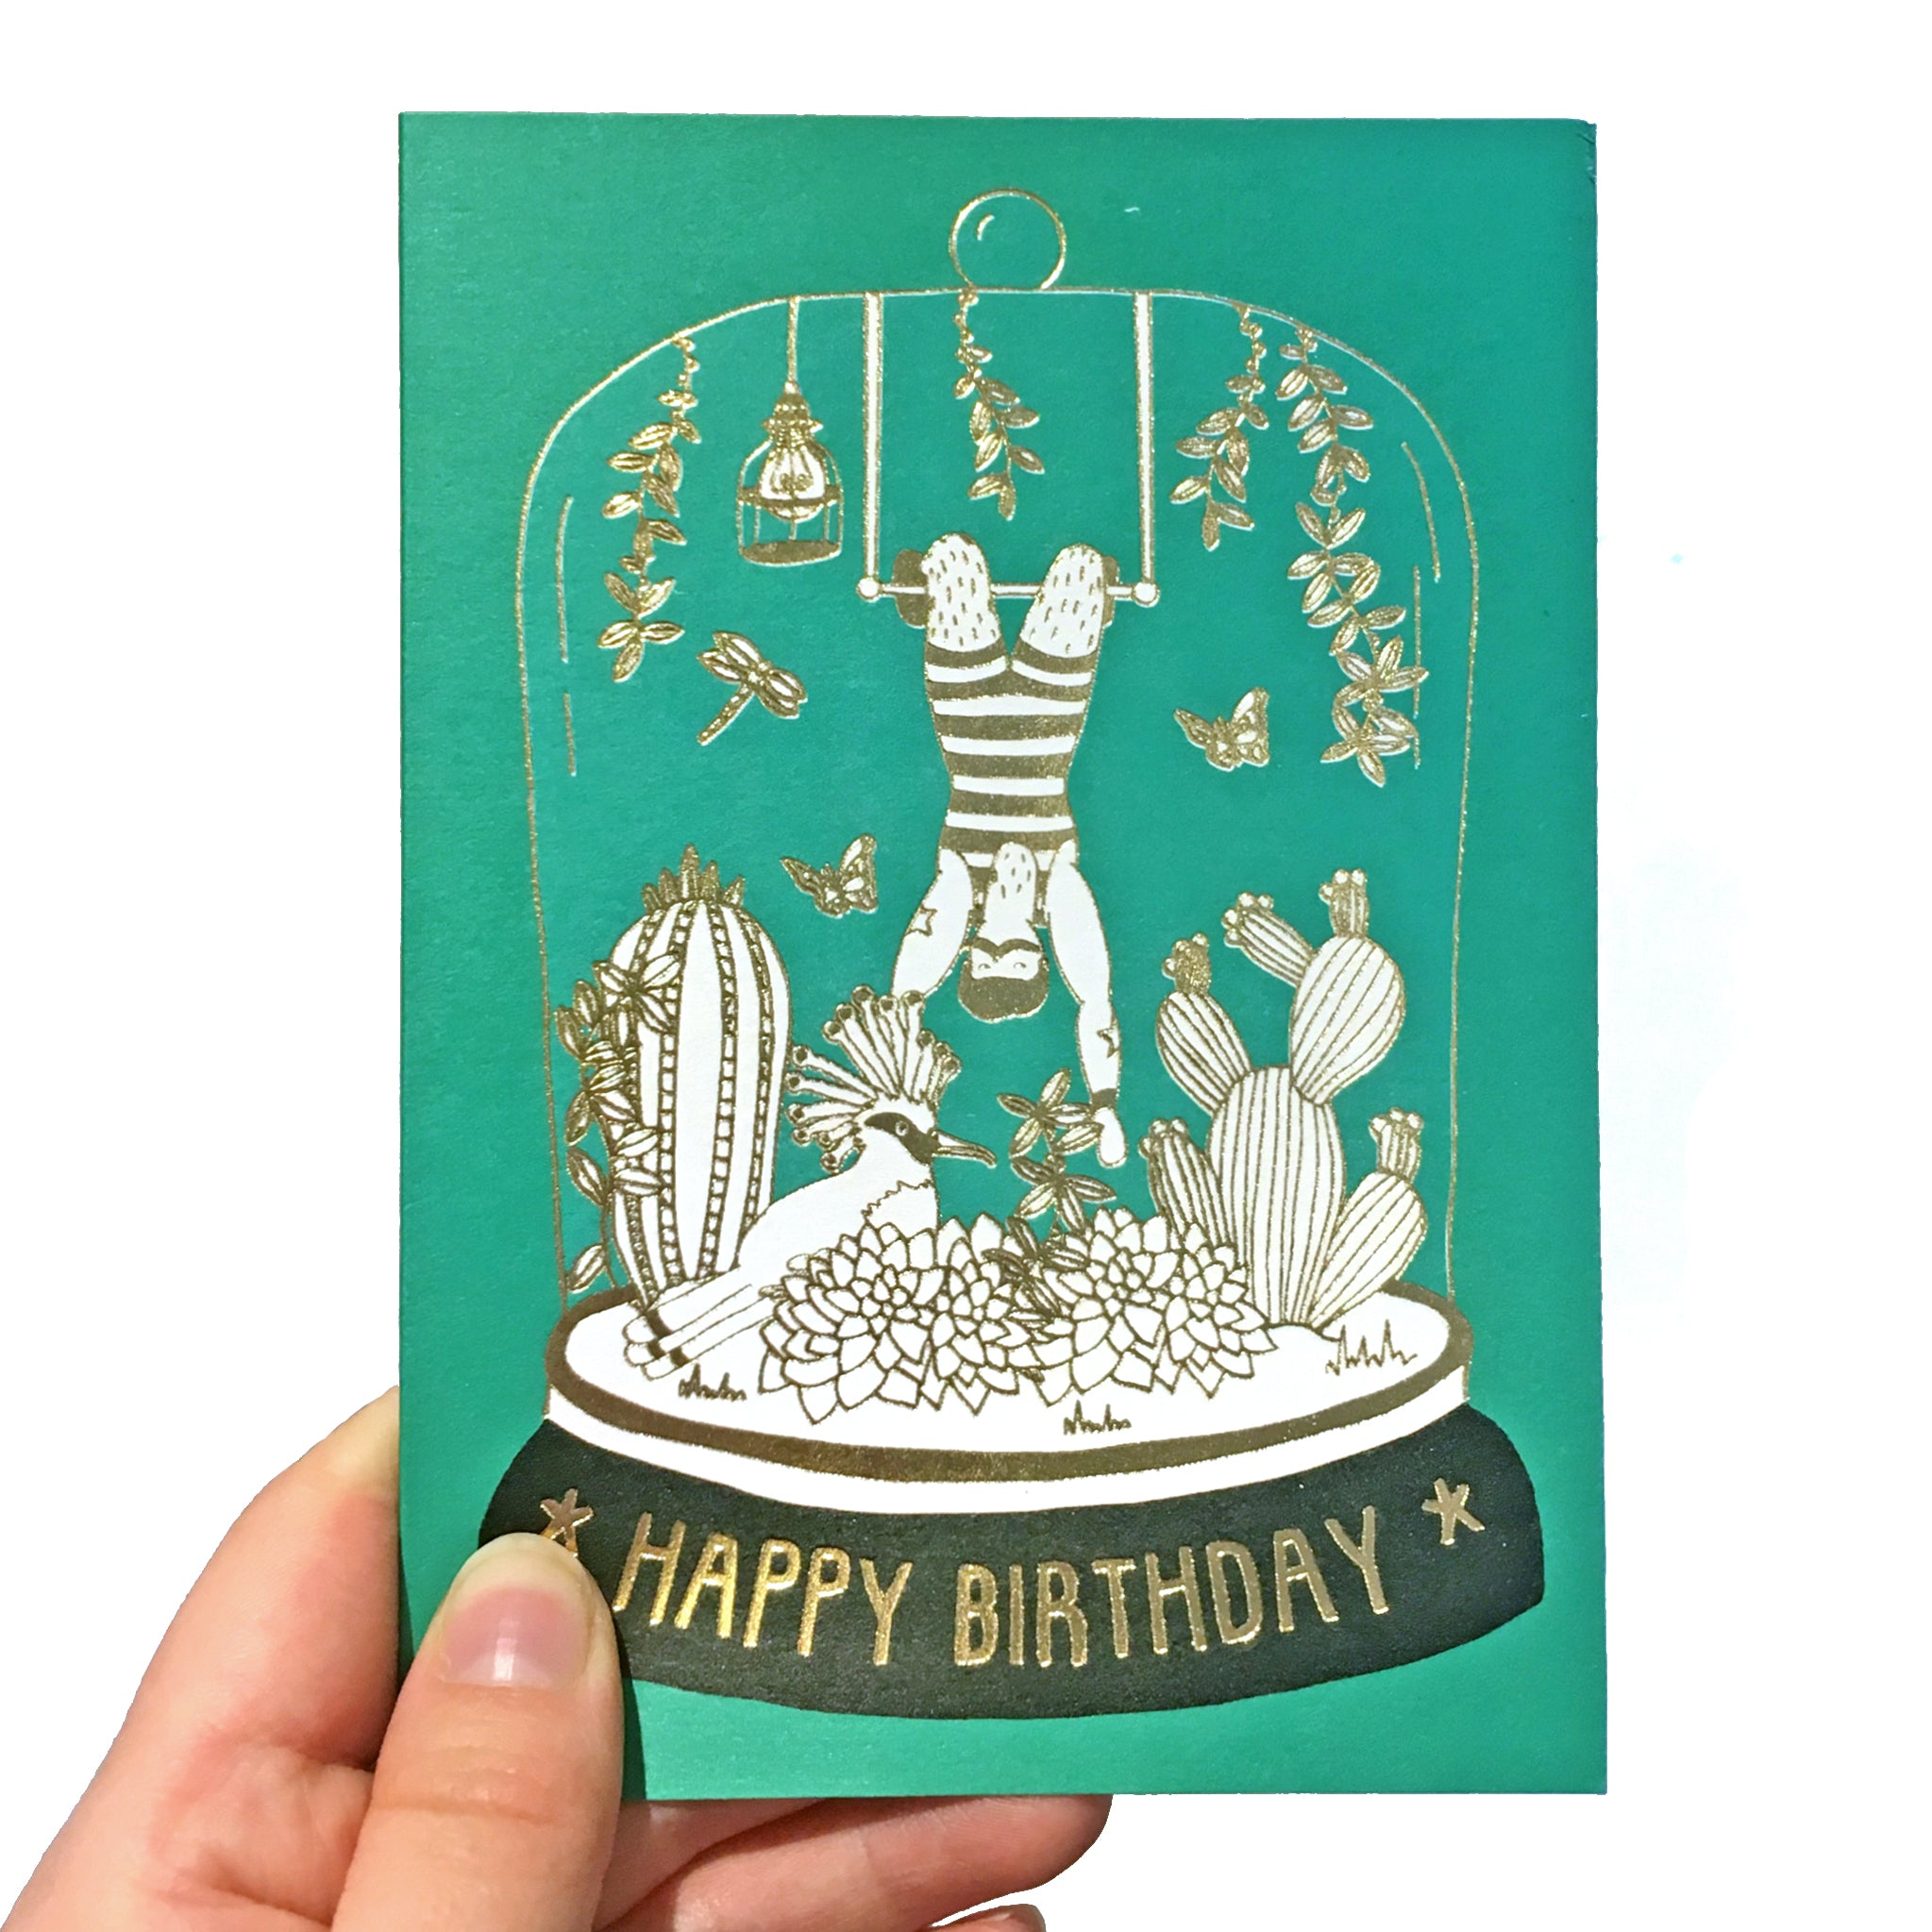 Green birthday card with gold detail featuring an acrobat in a belljar